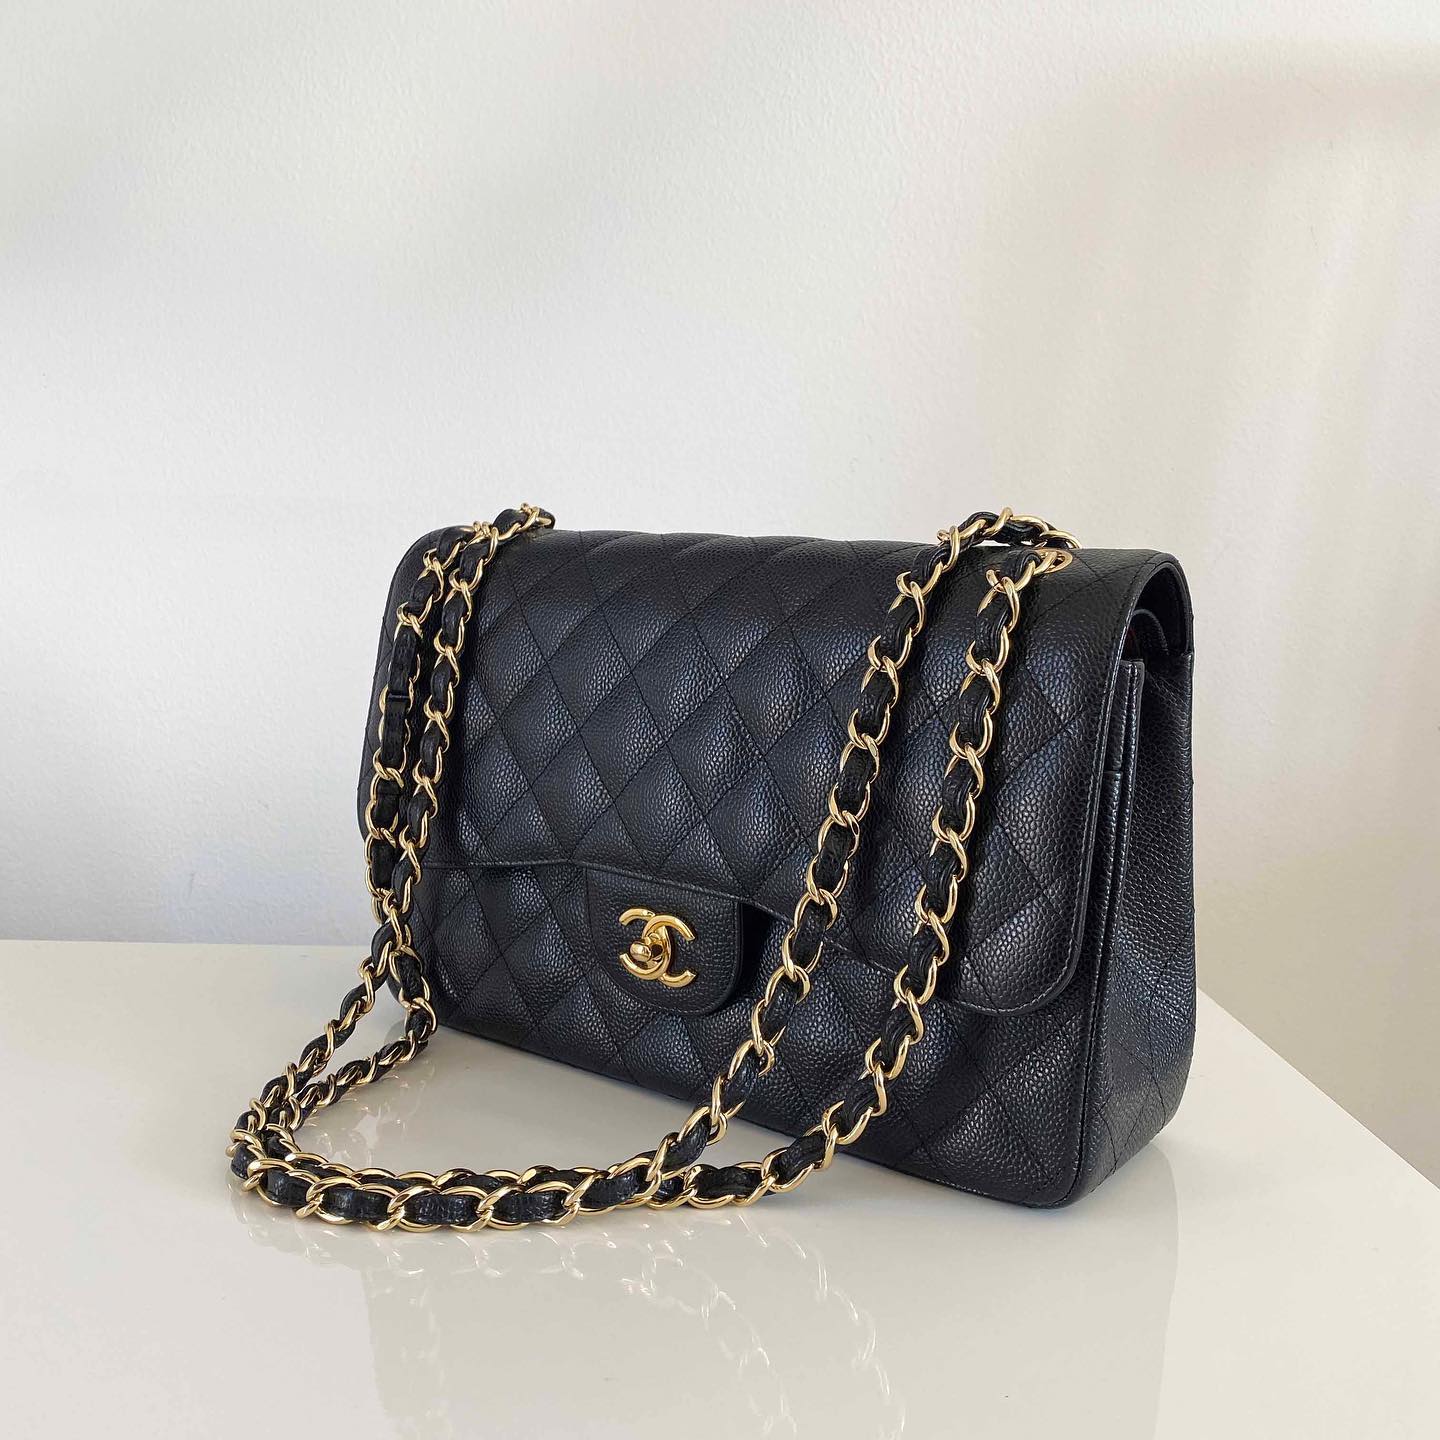 A Timeline of Classic Chanel Bag Price Increases Over The Years - BOPF ...